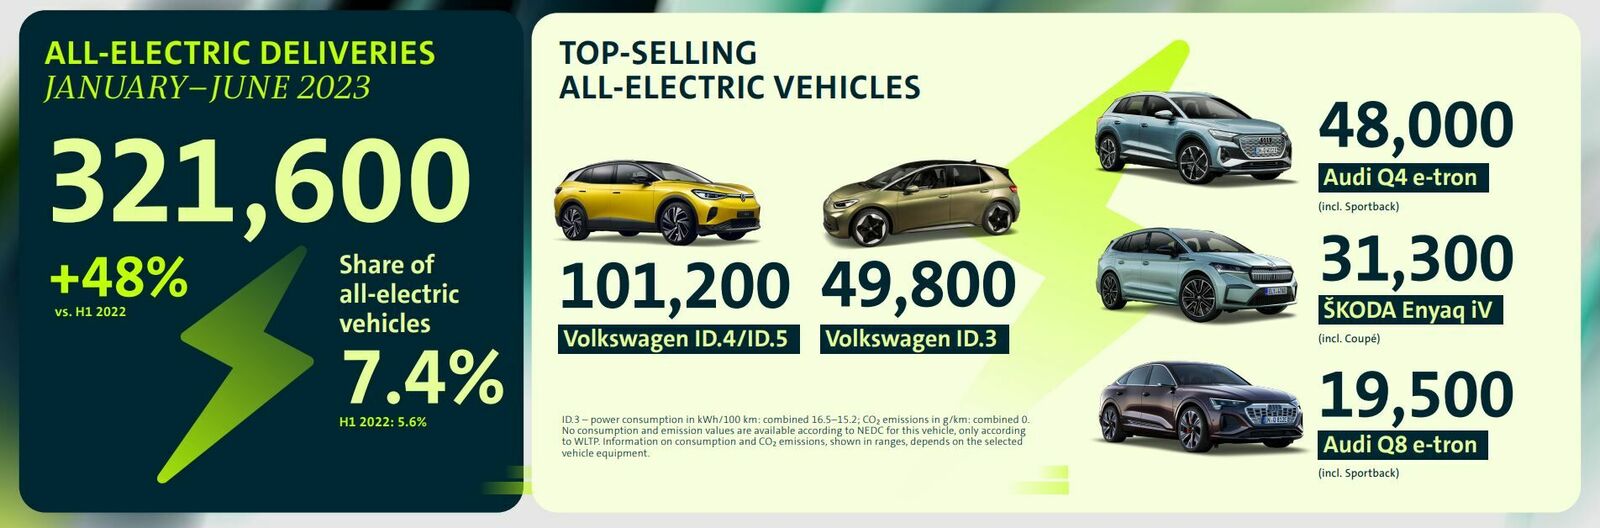 All-electric deliveries in the first half year 2023